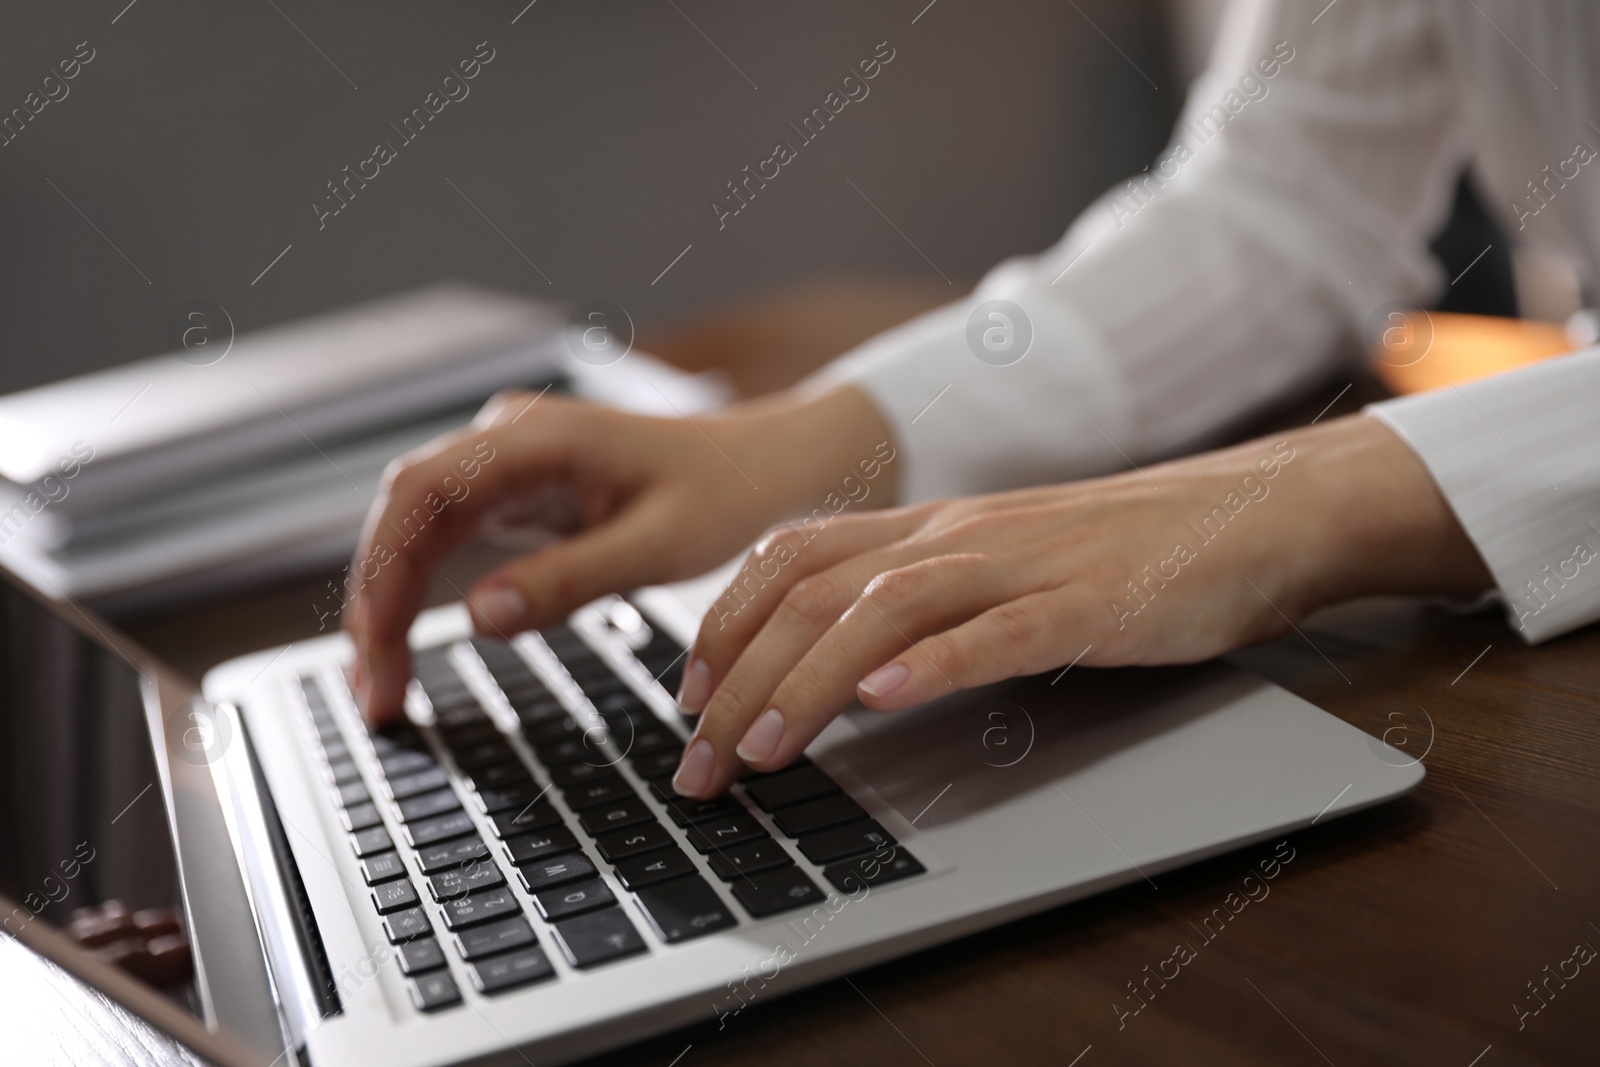 Photo of Woman working with laptop in office, closeup of hands